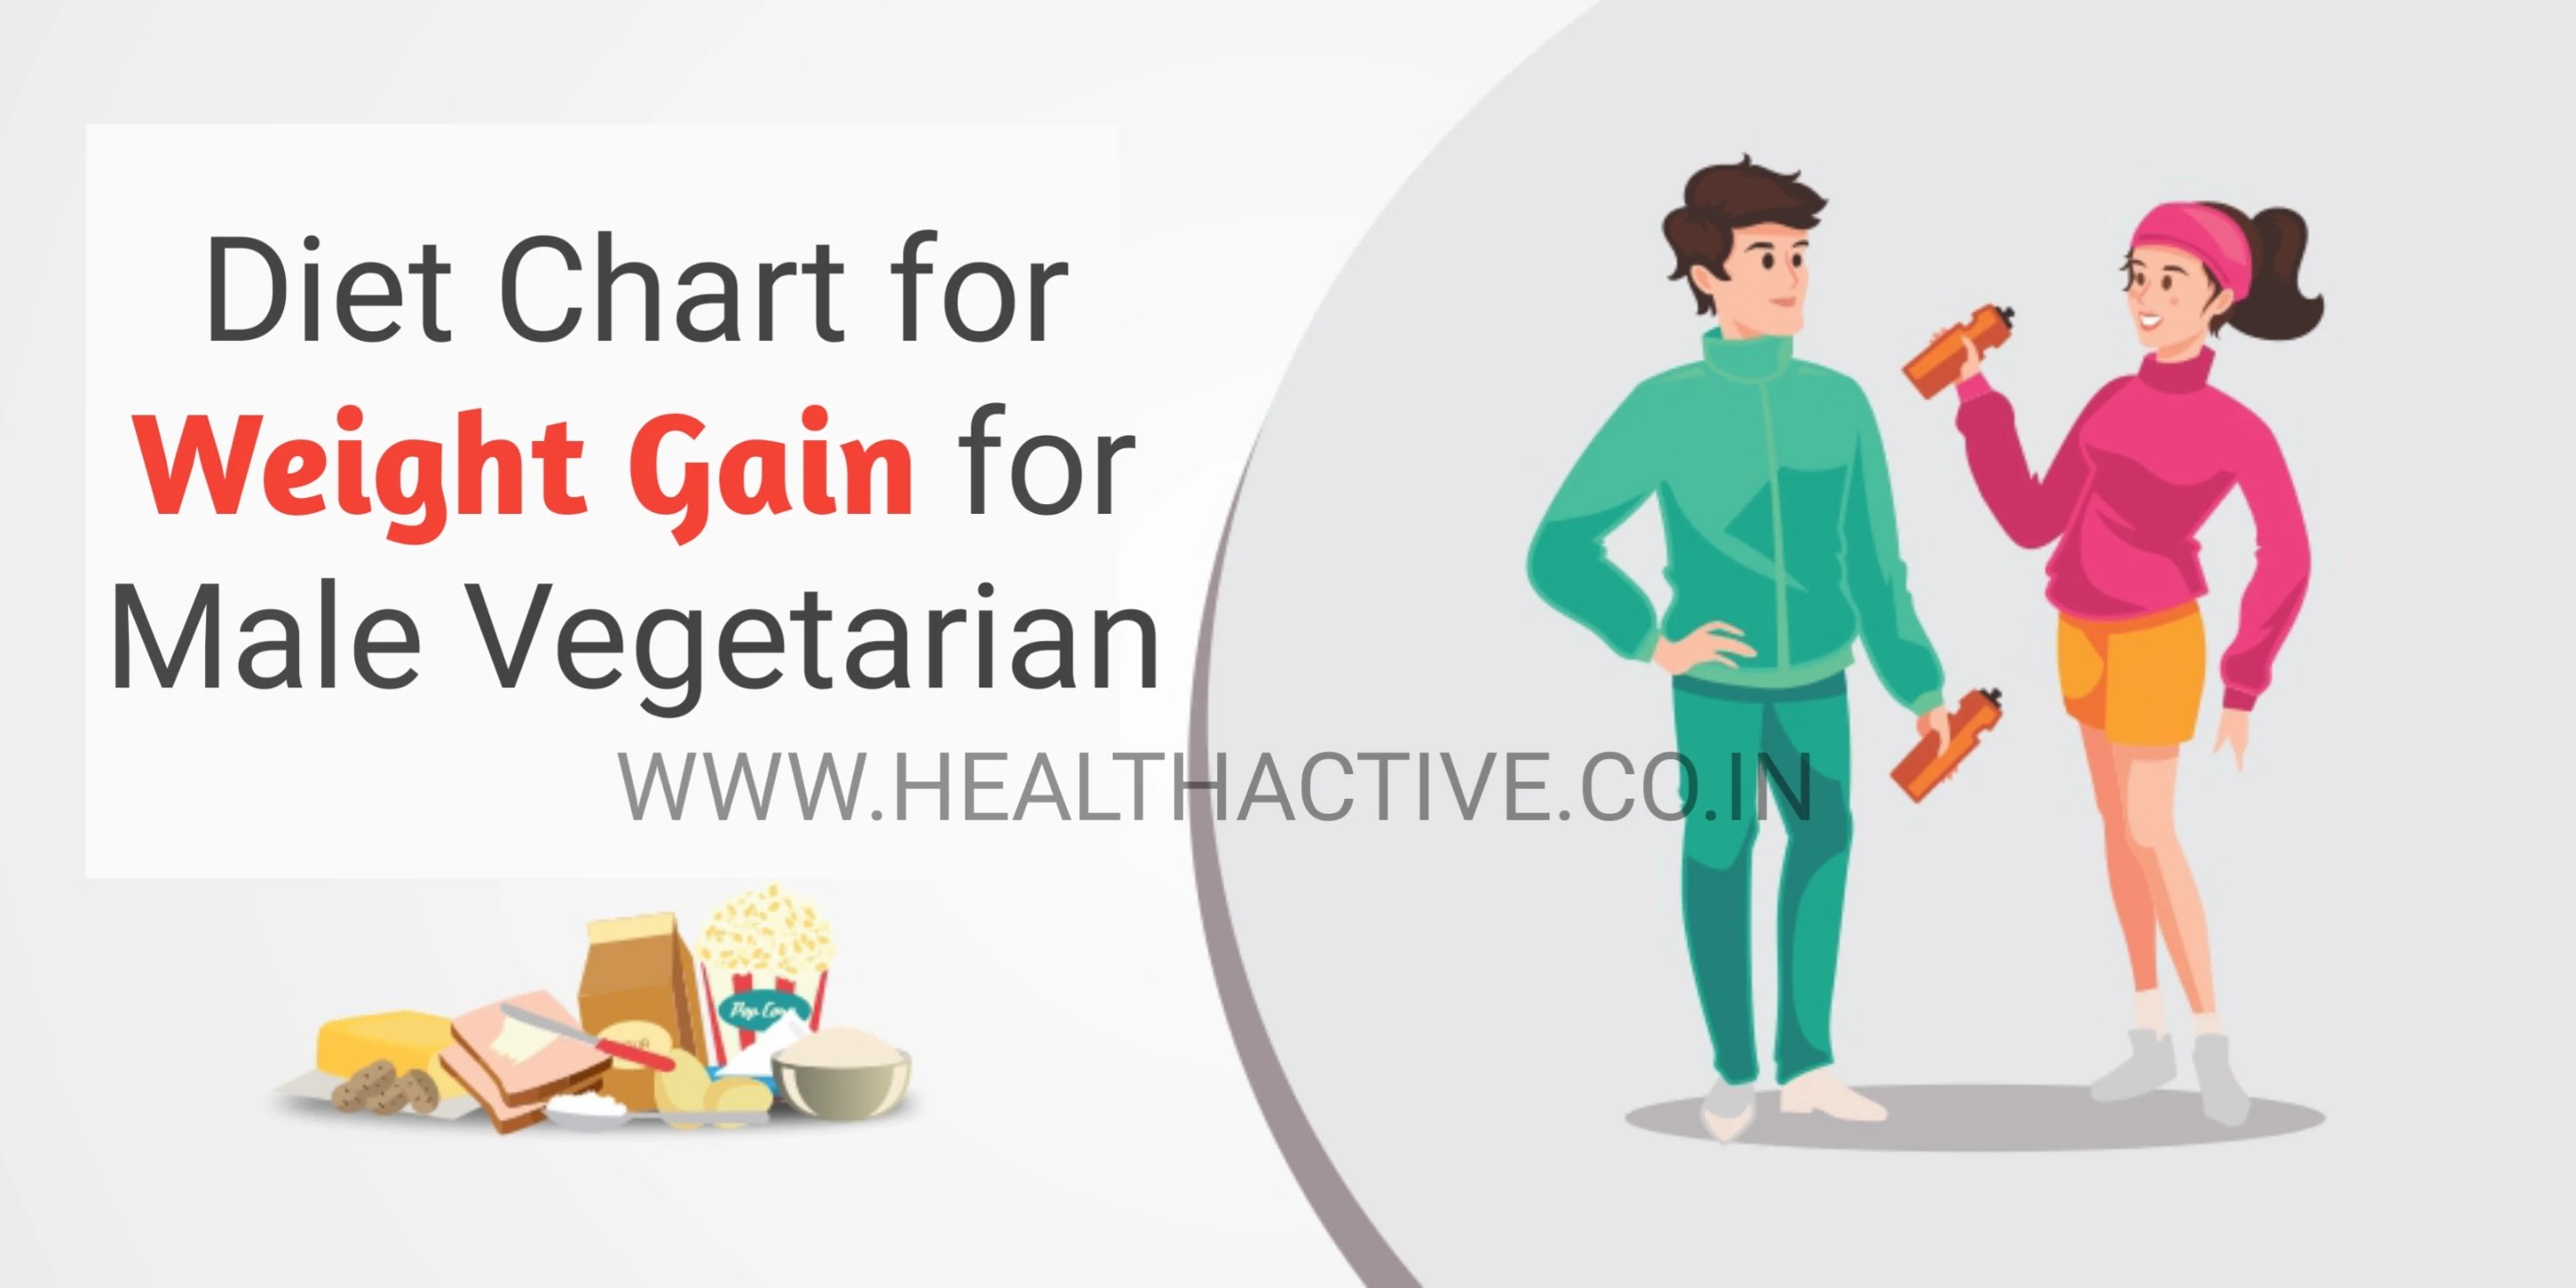 Diet Chart for Weight Gain for Male Vegetarian